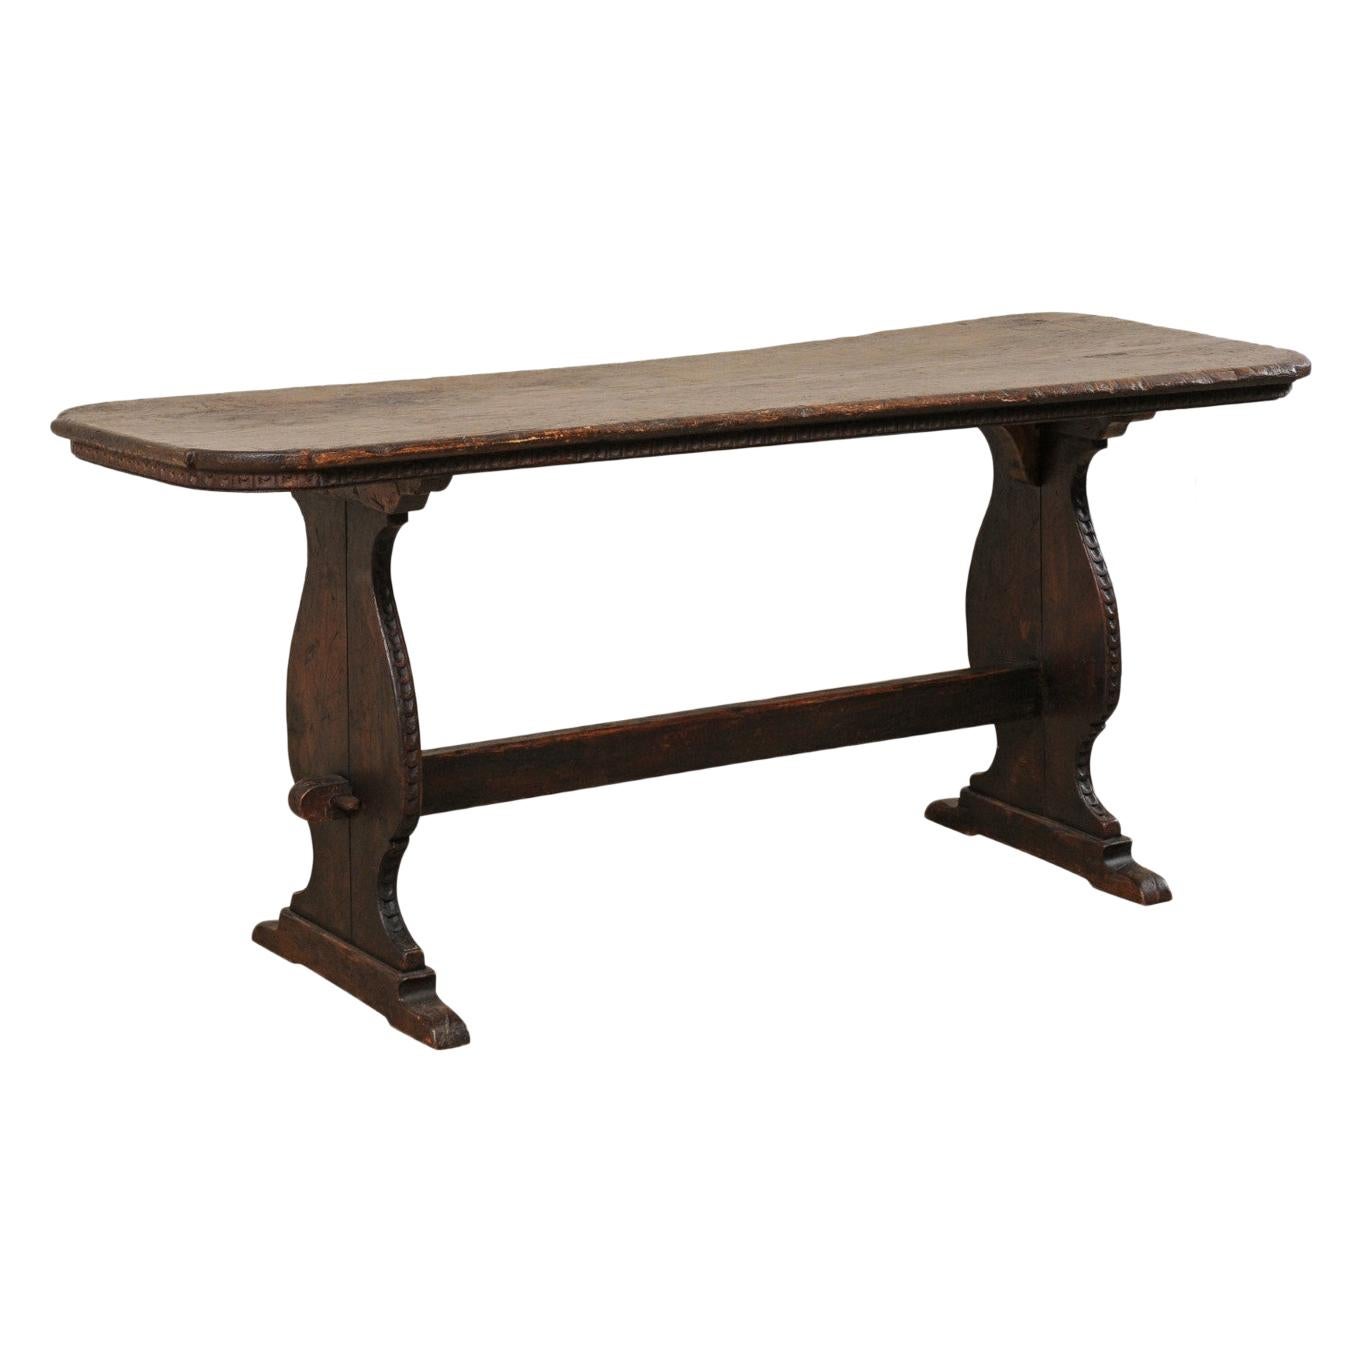 Handsome Antique Italian Console Desk with Nicely Carved Trestle Style Legs